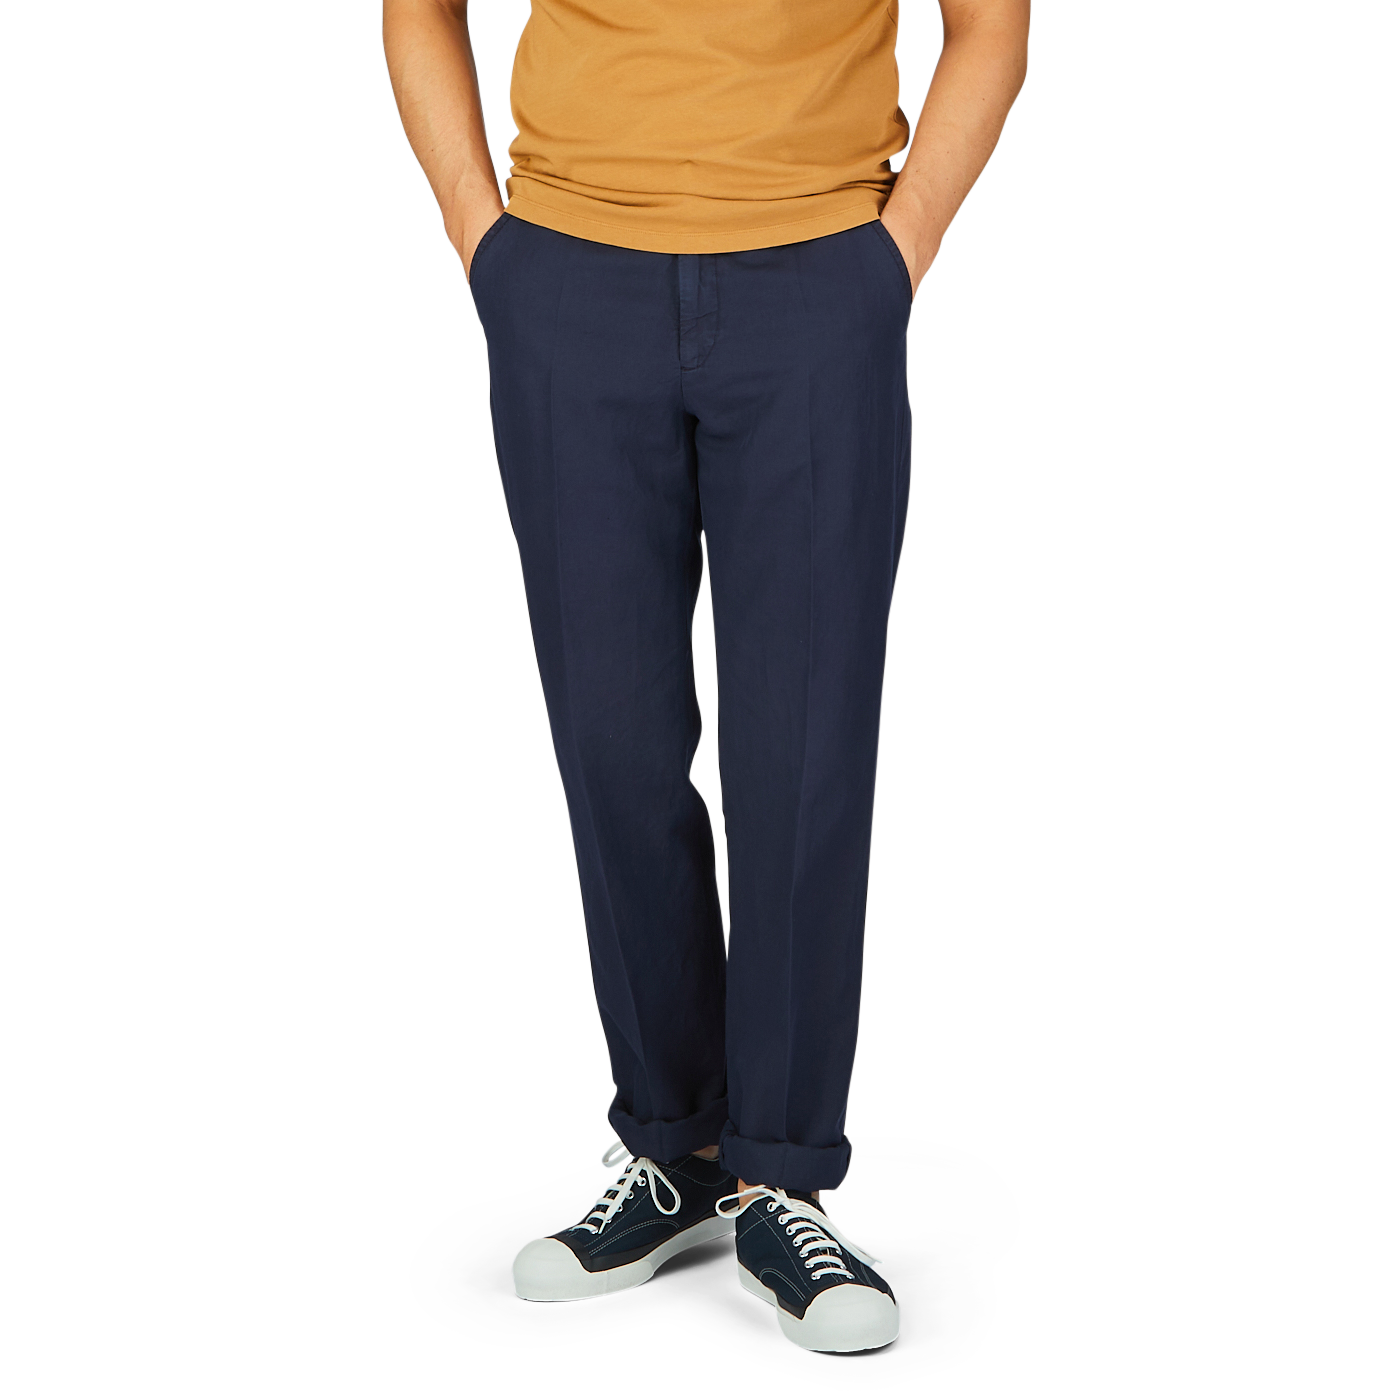 Man wearing a mustard Cotton-Linen Mix shirt and Navy Blue Chinolino Straight Fit Trousers from Incotex with white lace-up sneakers.